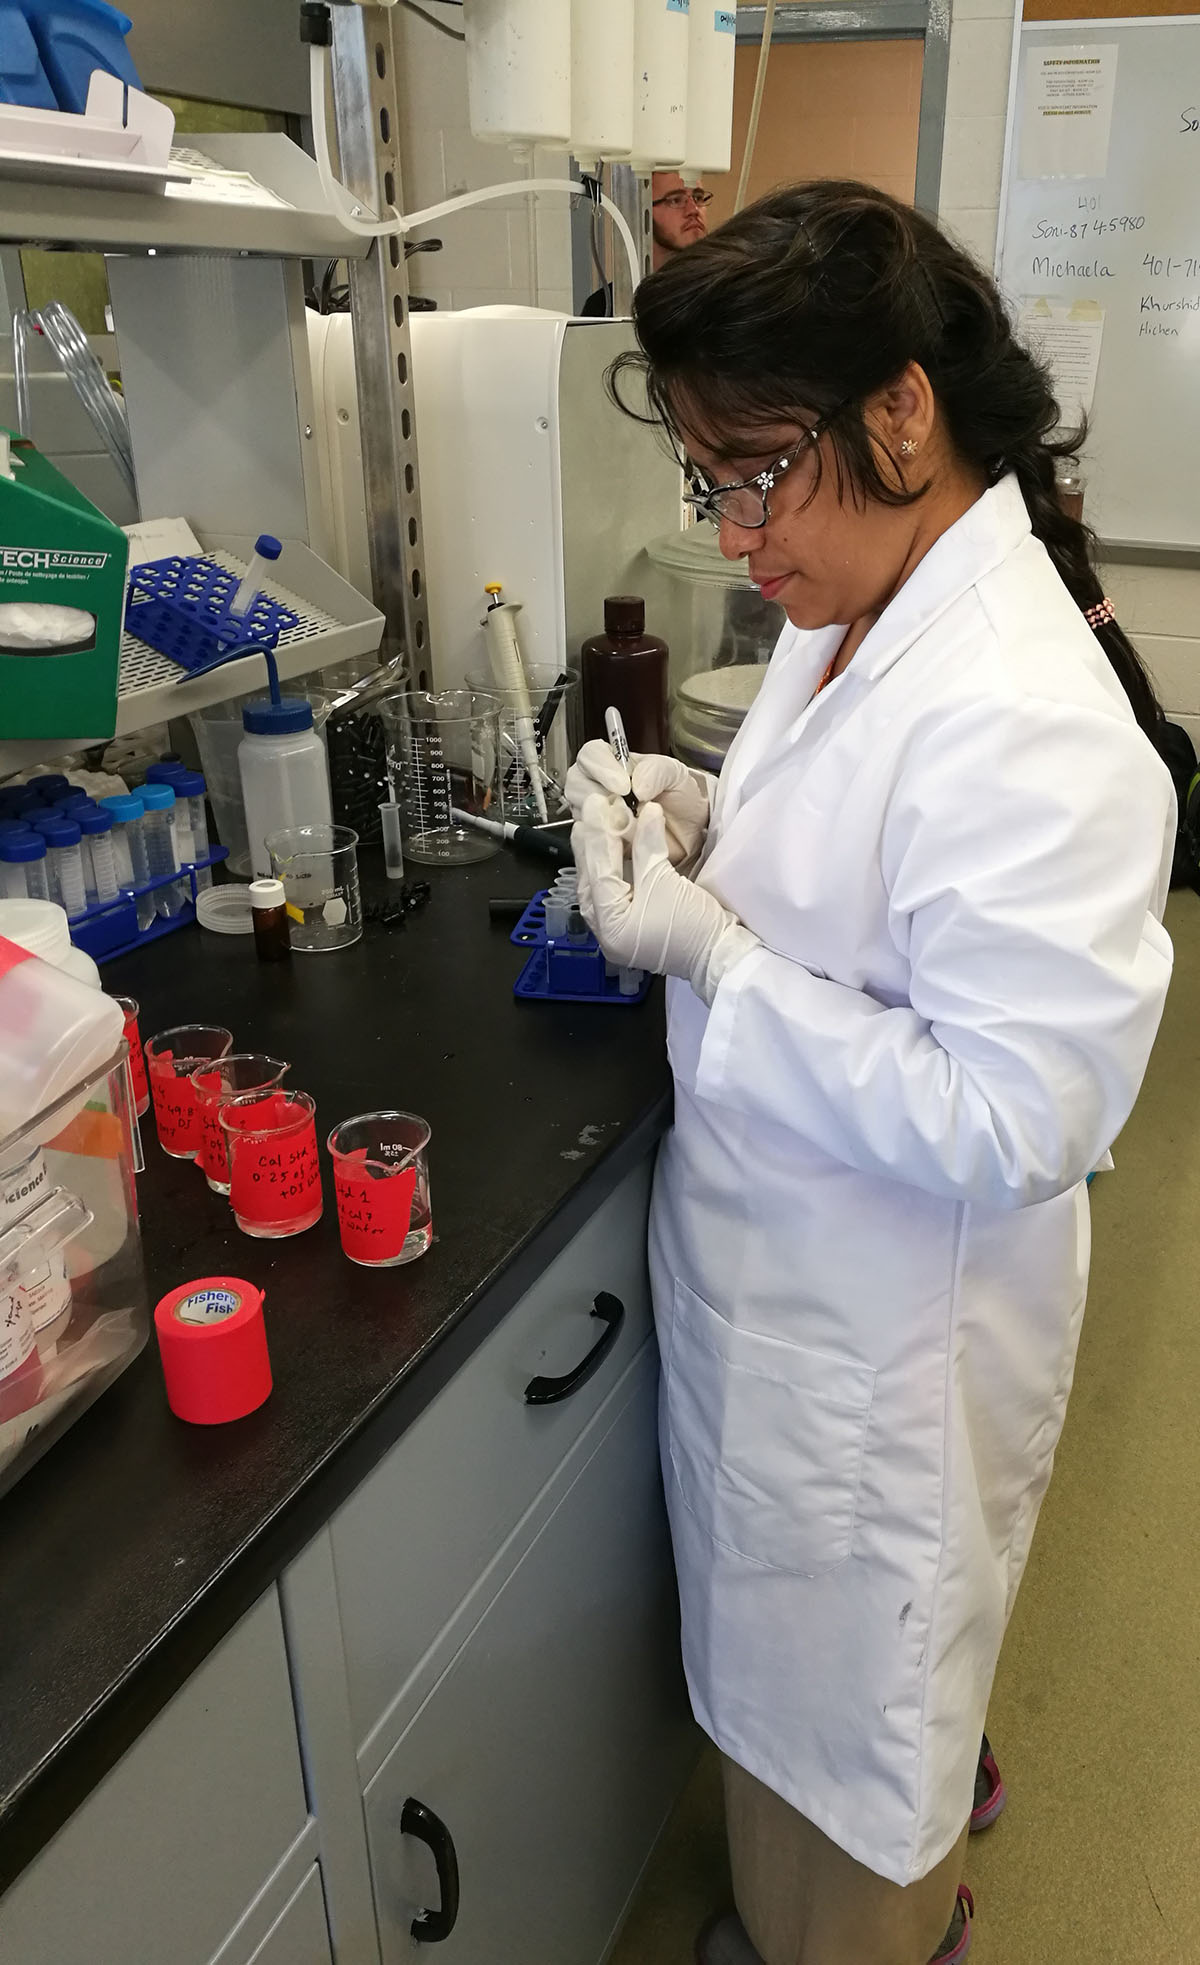 Khurshid Jahan prepares the collected stormwater runoff sample for further analysis with ion chromatography in Rhode Island as part of her graduate work. Photo credit: Tanjil Ahmed  